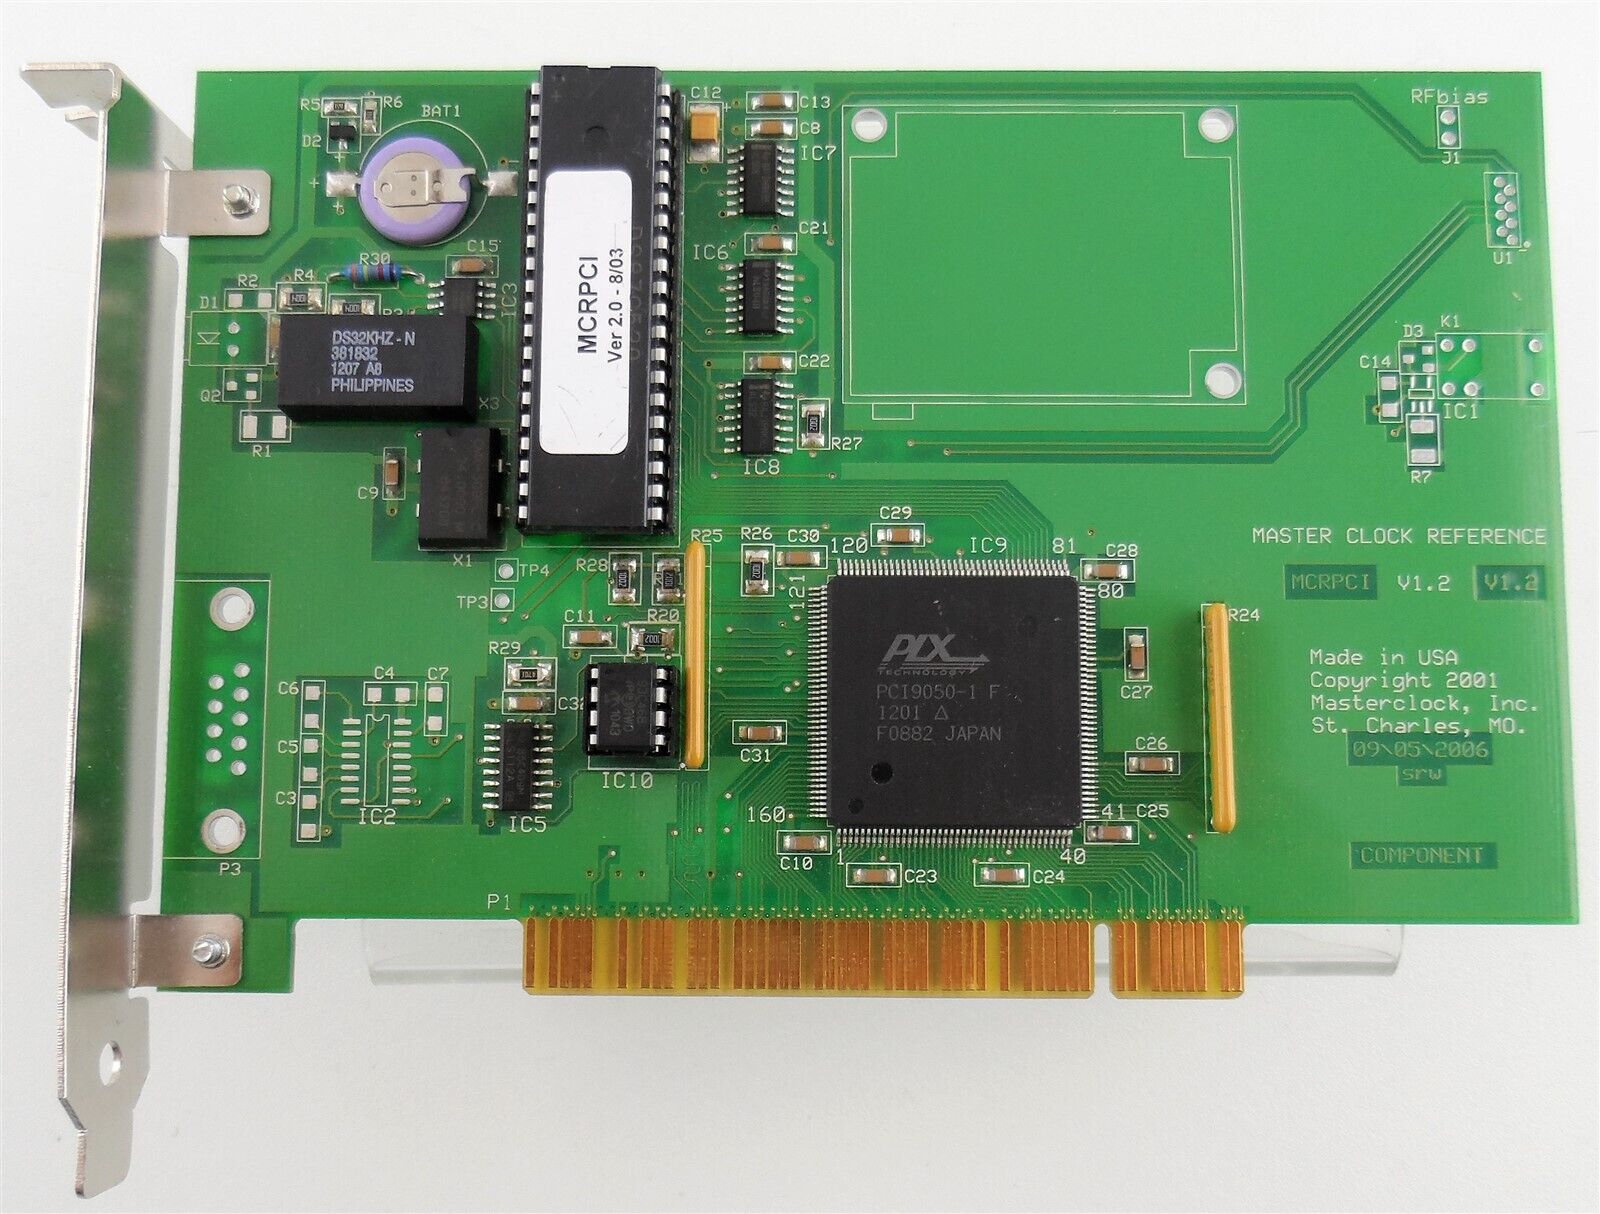 Masterclock MCR-PCI Real Time Clock Reference PCI Card for Parts or Repair